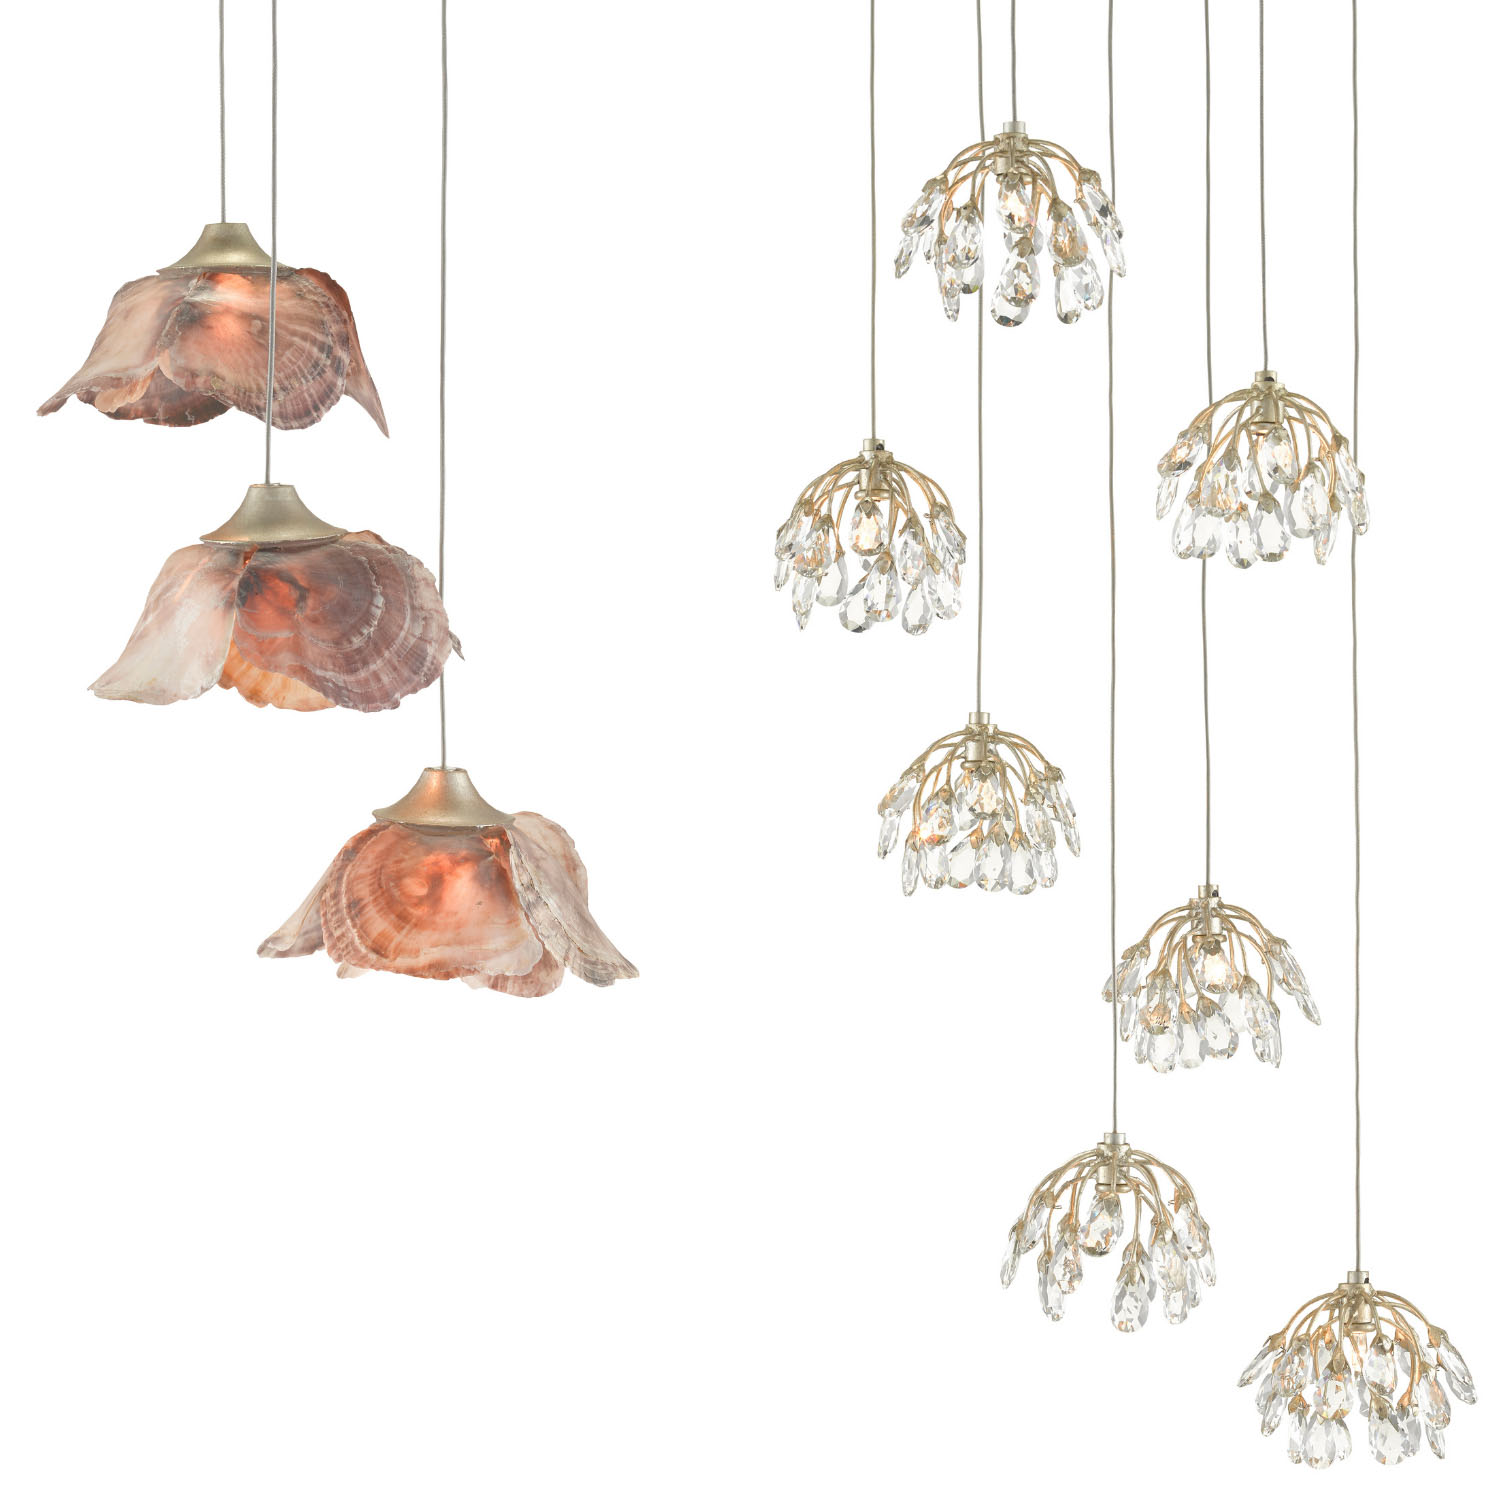 shade design options for the Currey and Company Multi Drop Pendant Collection